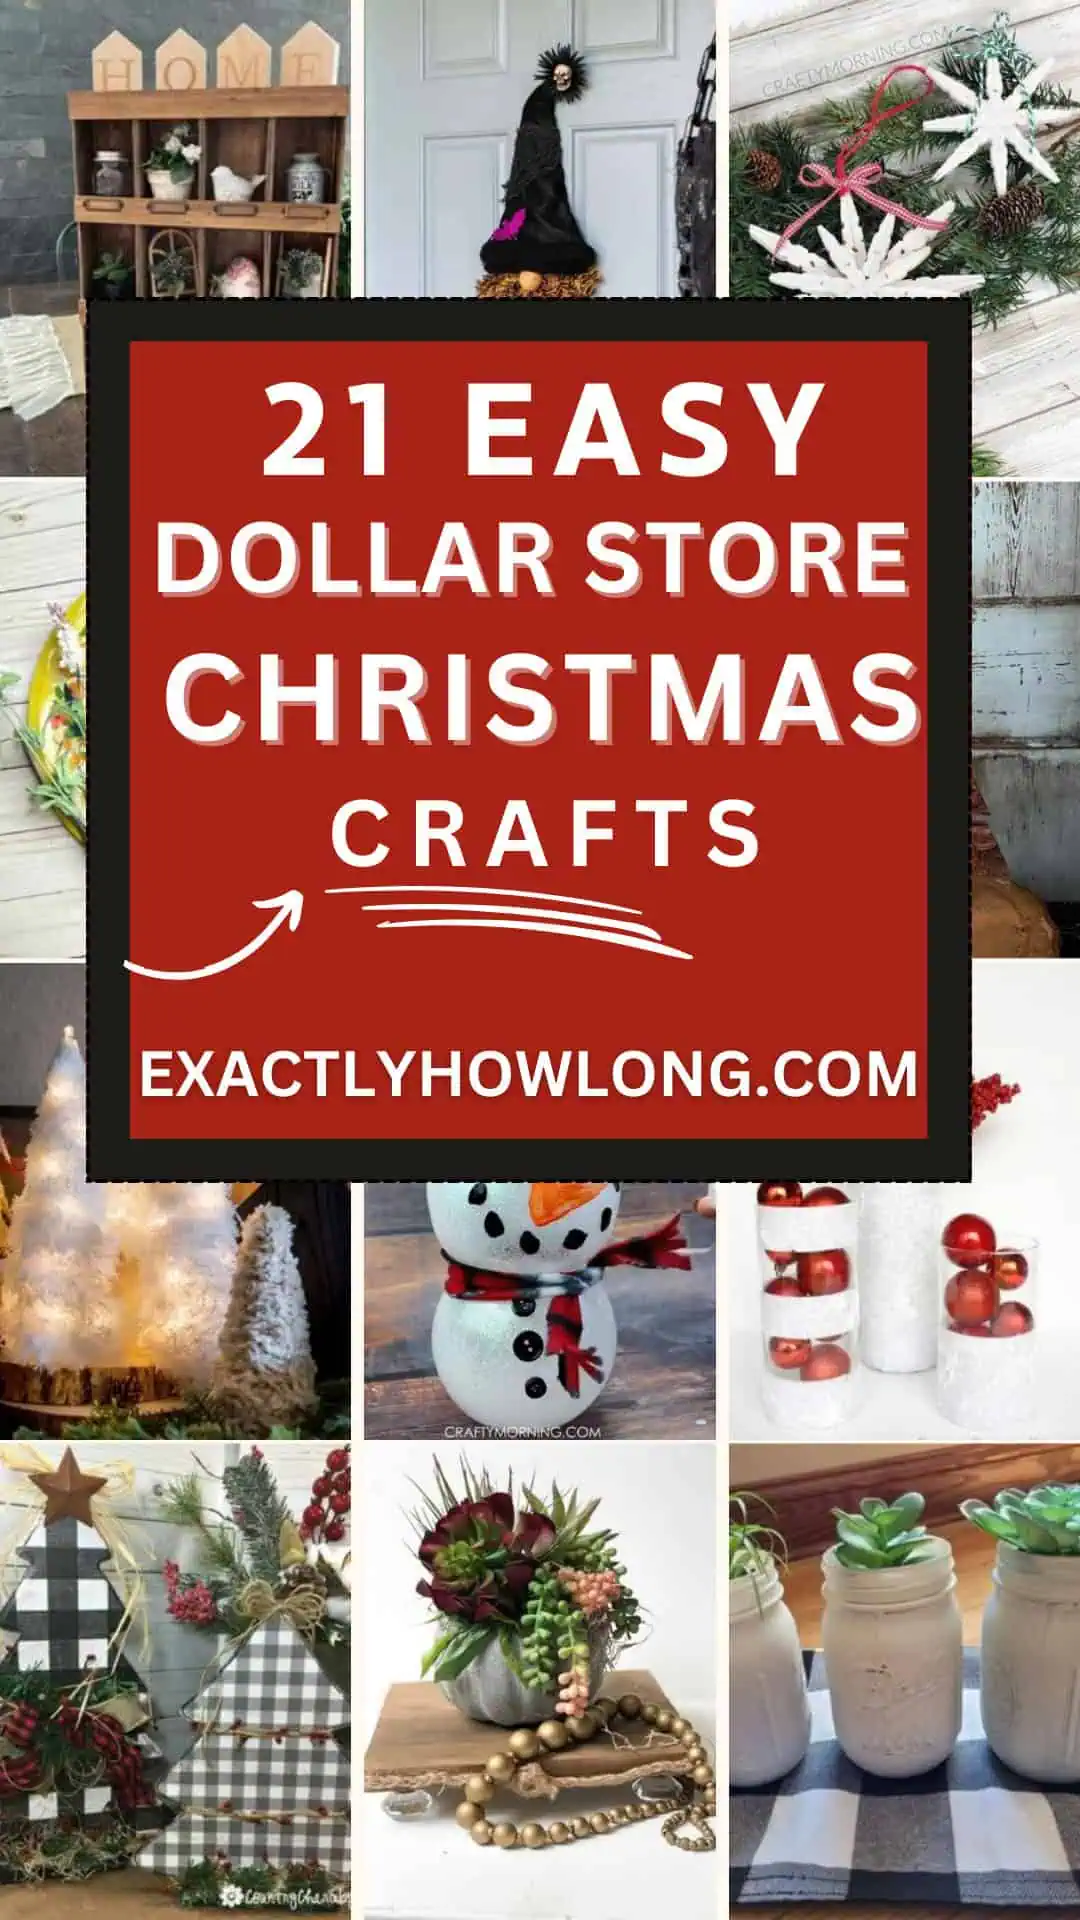 Easy, inexpensive DIY Christmas crafts from the dollar store.